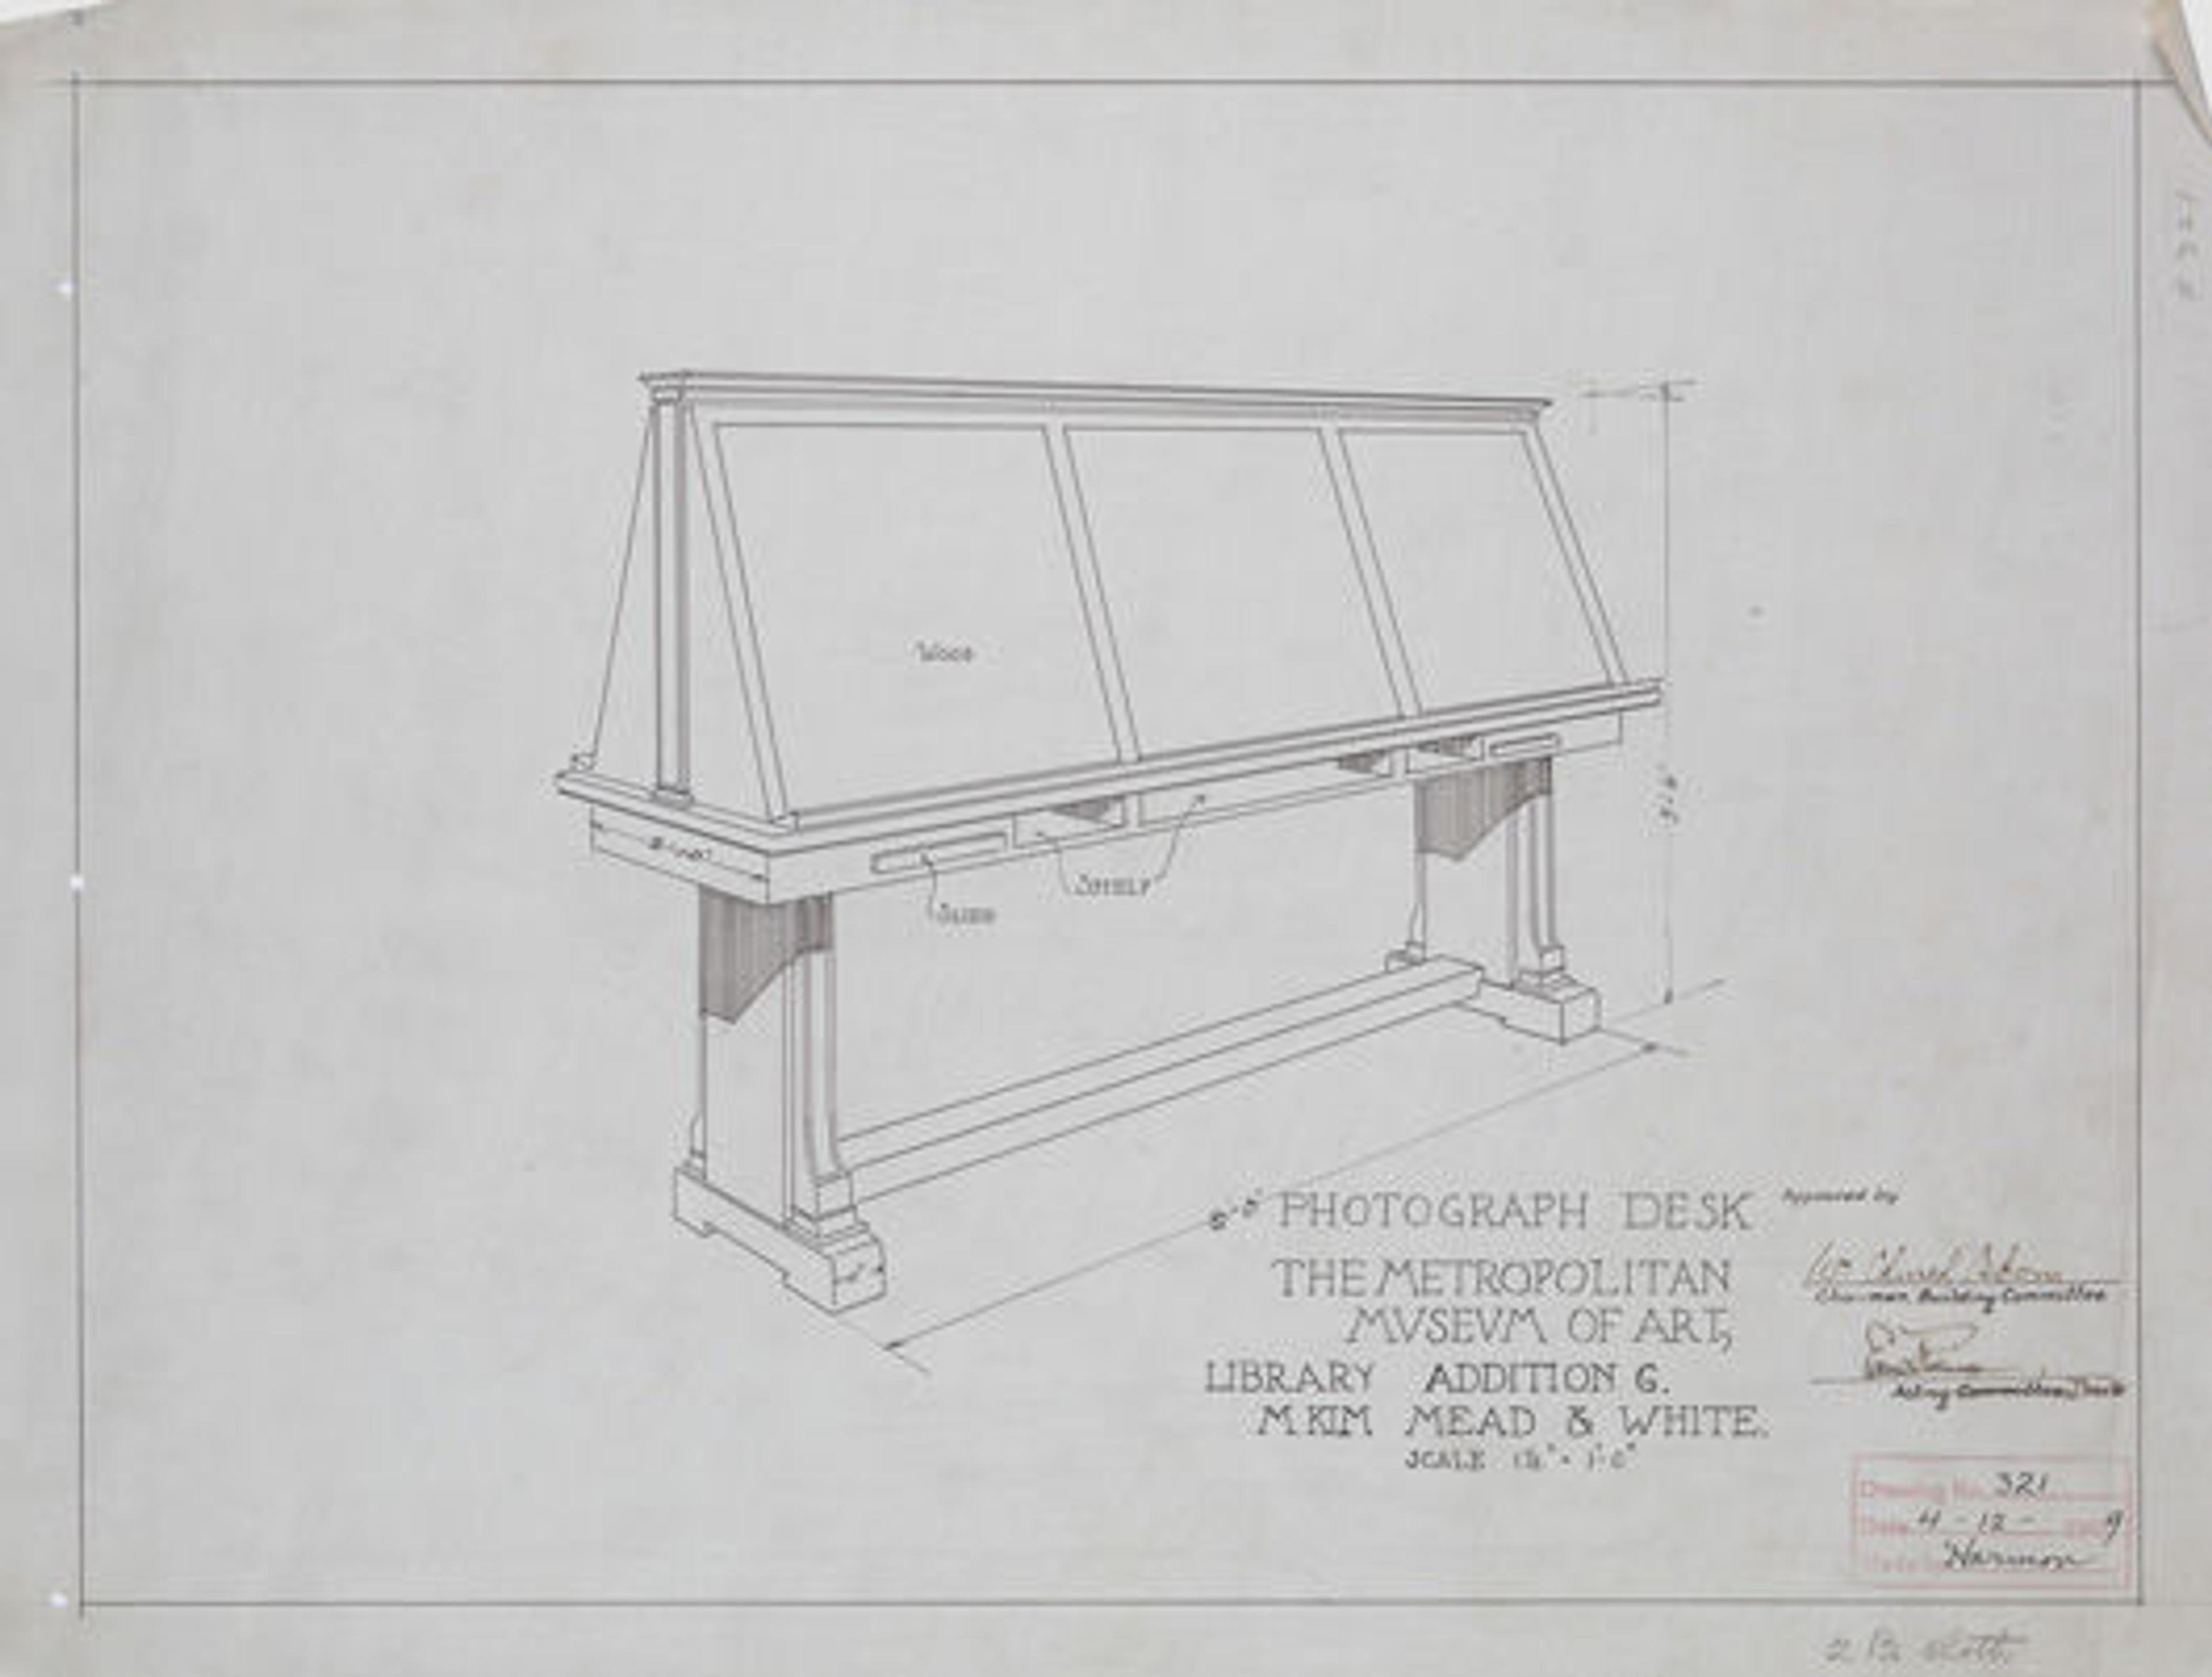 Design drawing for a photograph desk from 1910